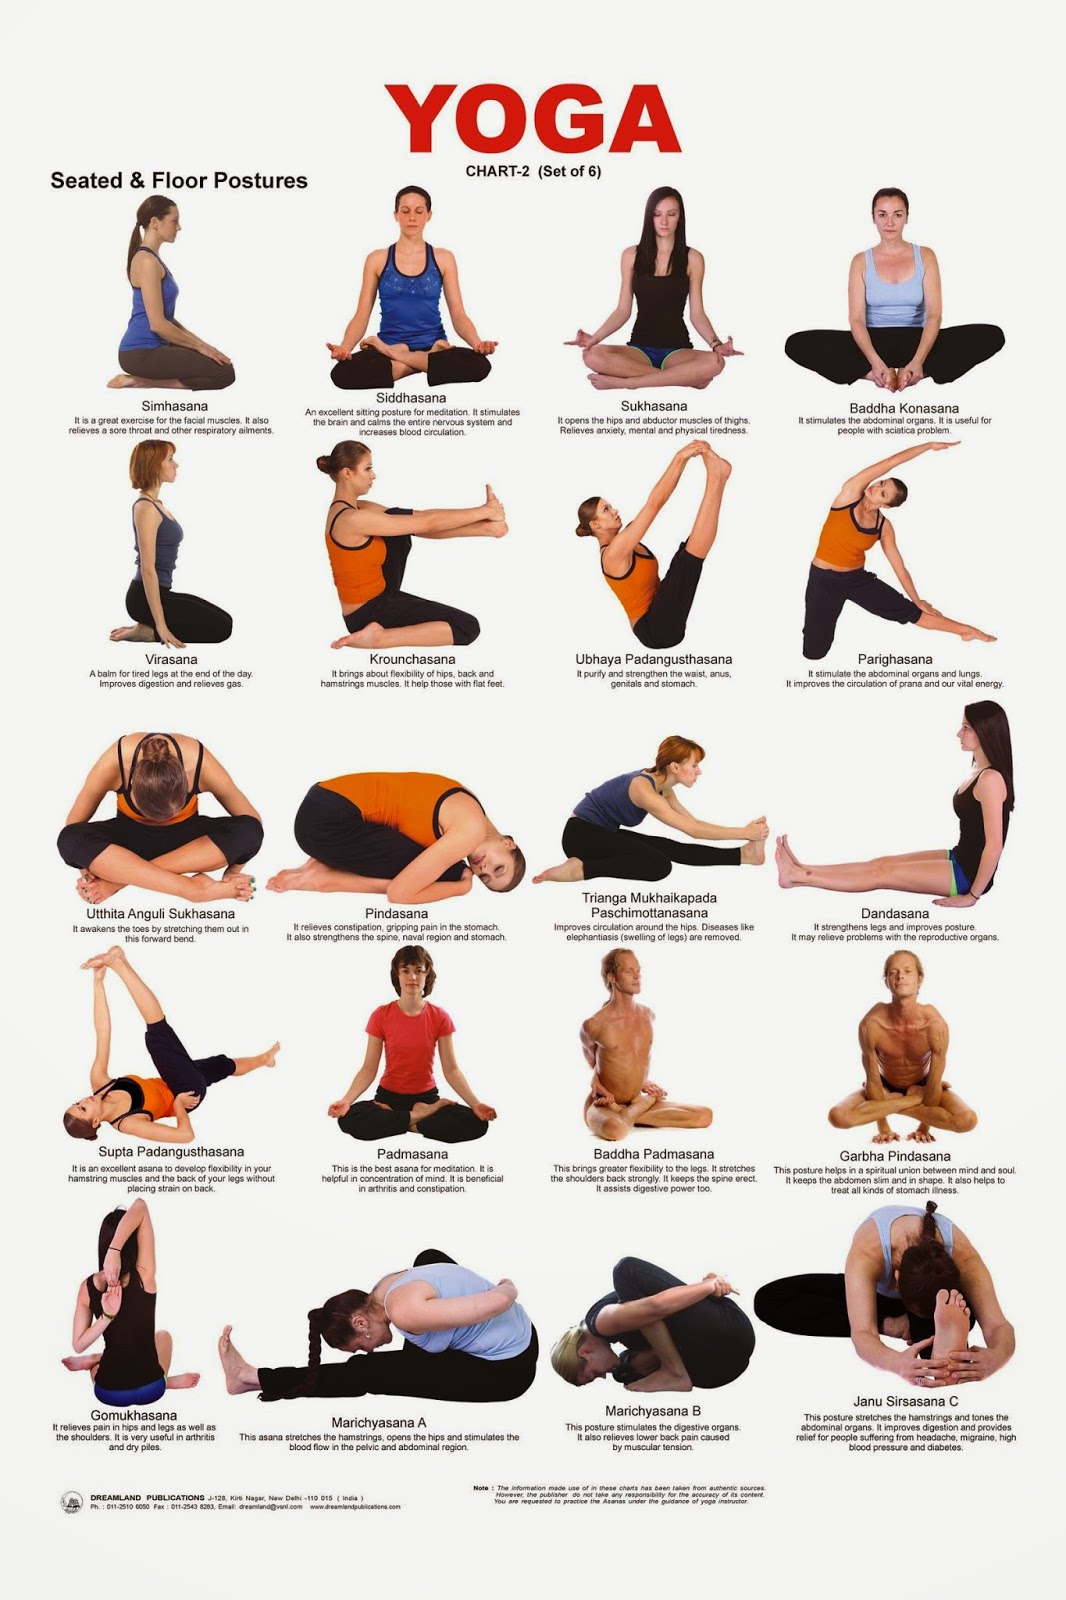 Yoga For Beginners The First Step Of Yoga Practice All